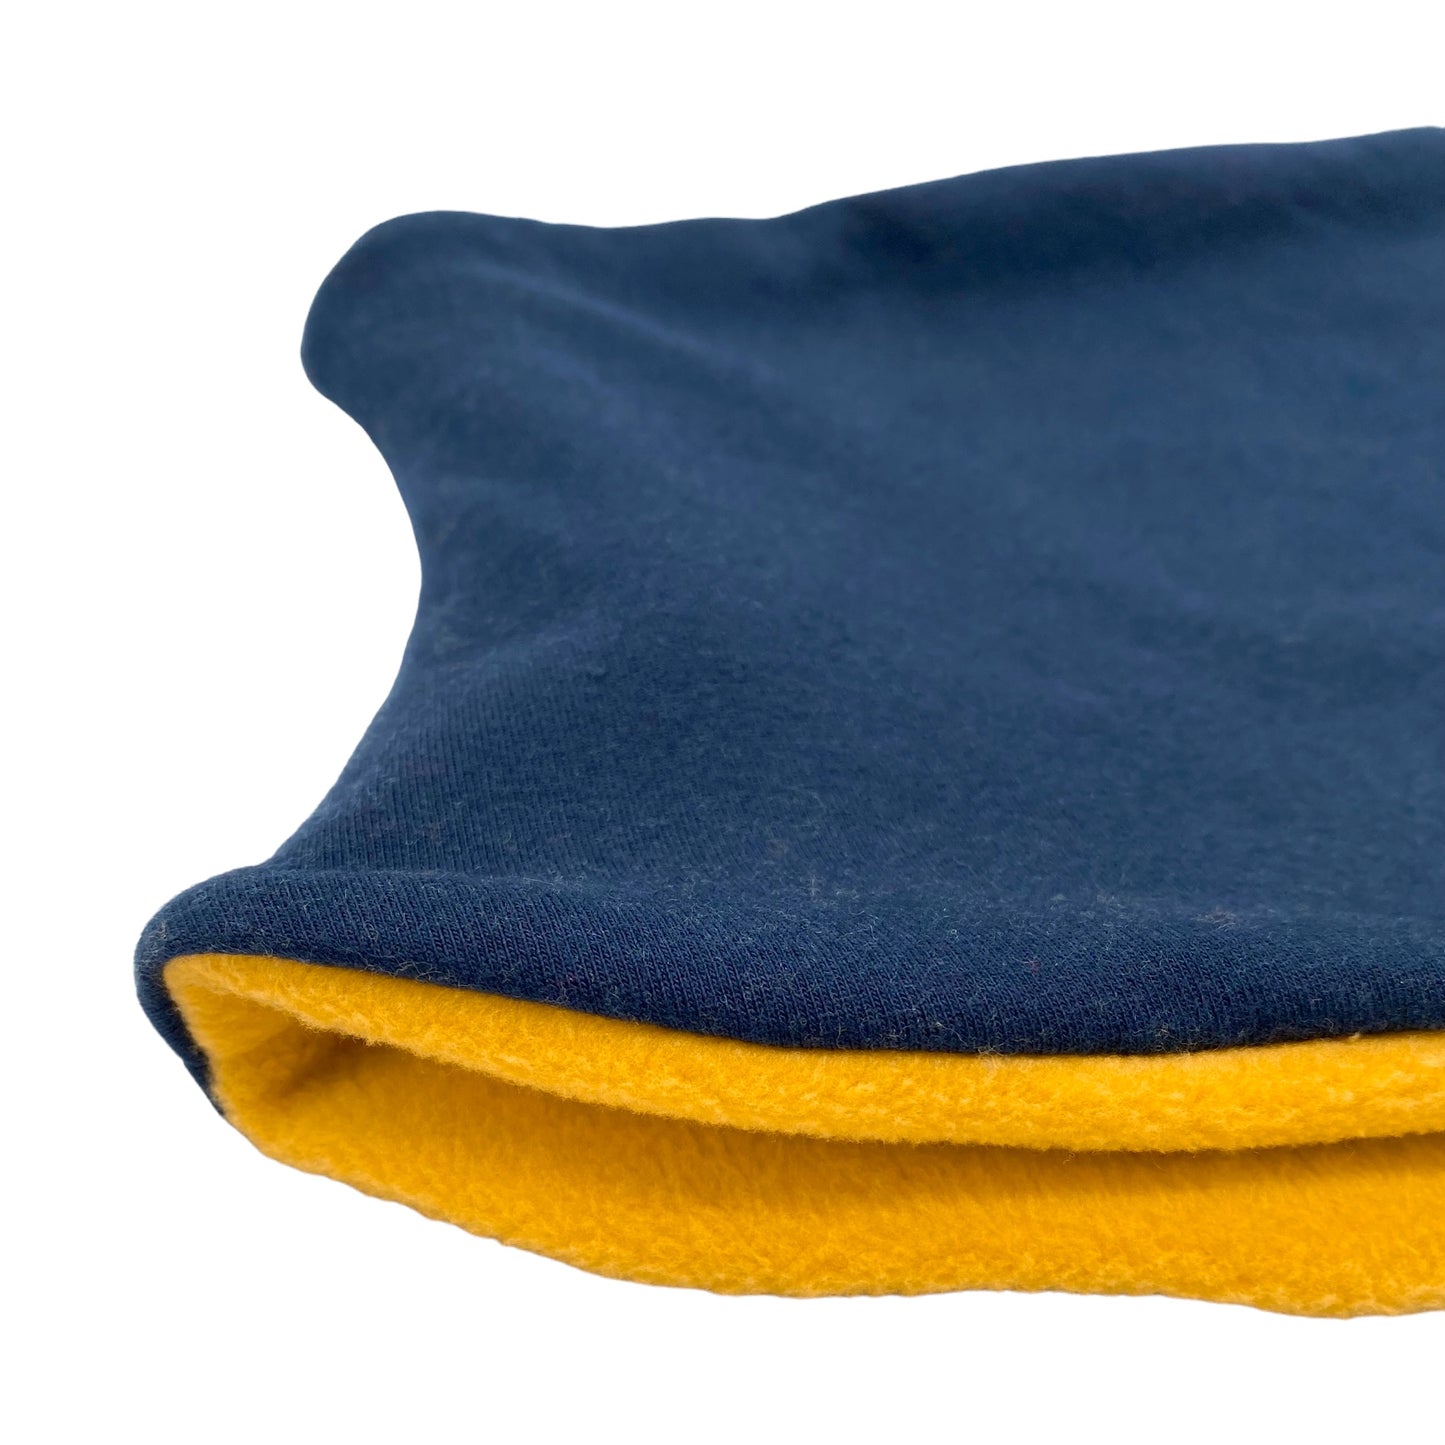 Child's Handmade Neck Warmer Solid Navy Blue with Yellow